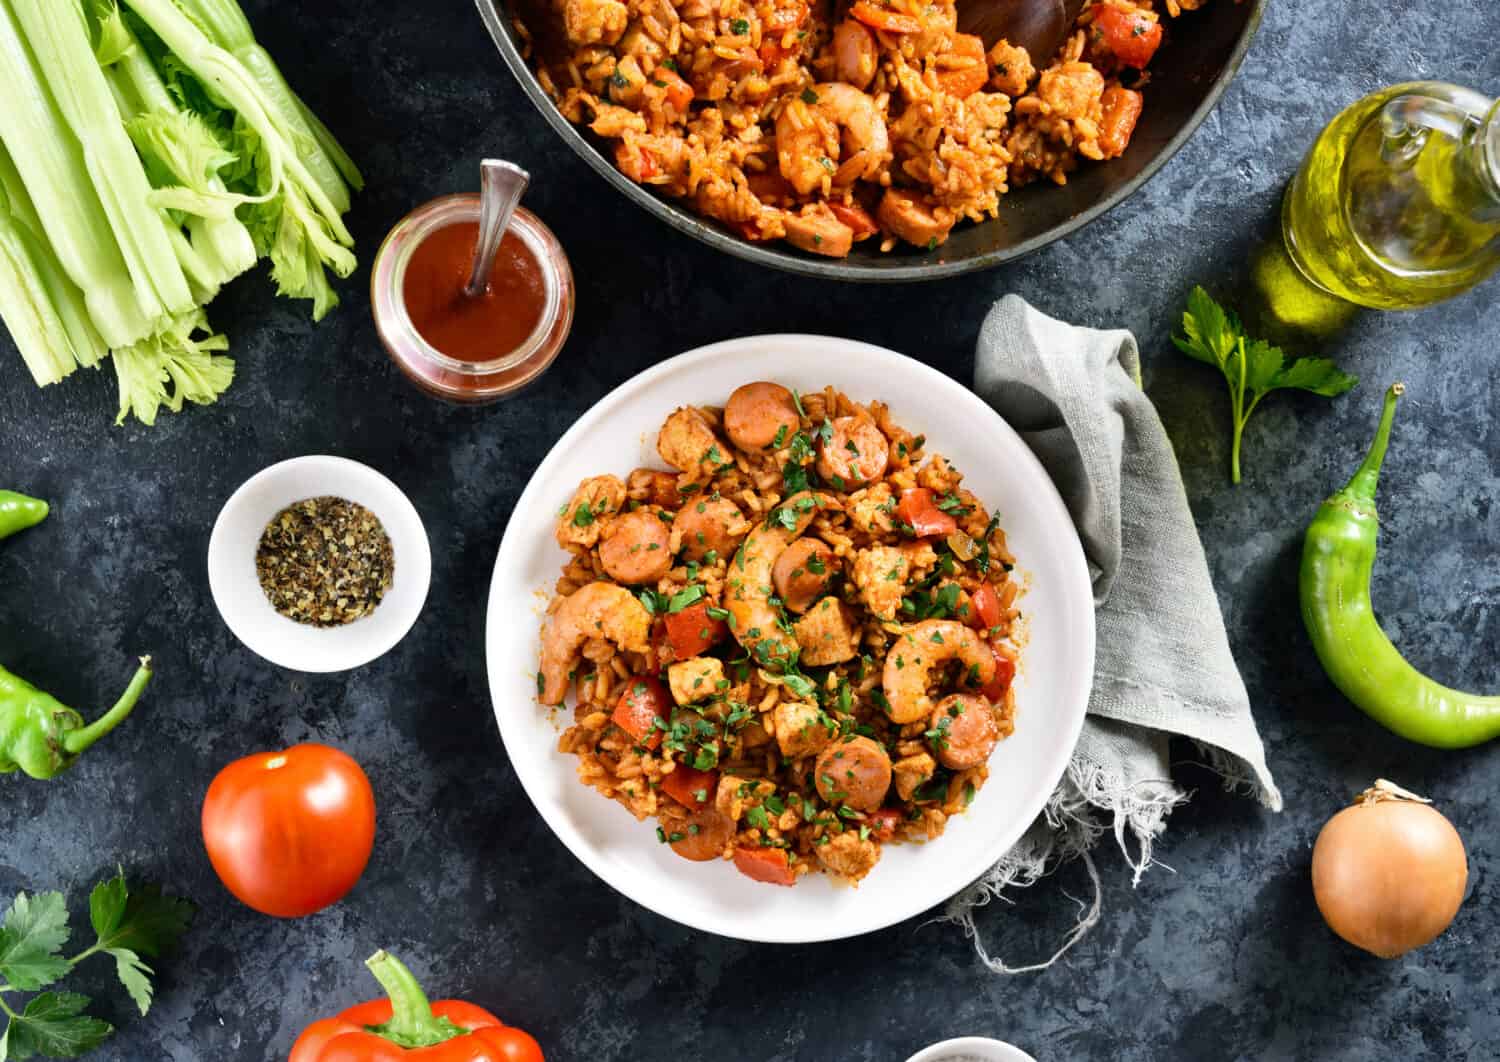 Creole jambalaya with rice, smoked sausages, chicken meat and vegetables on plate over blue stone background. Top view, flat lay, close up